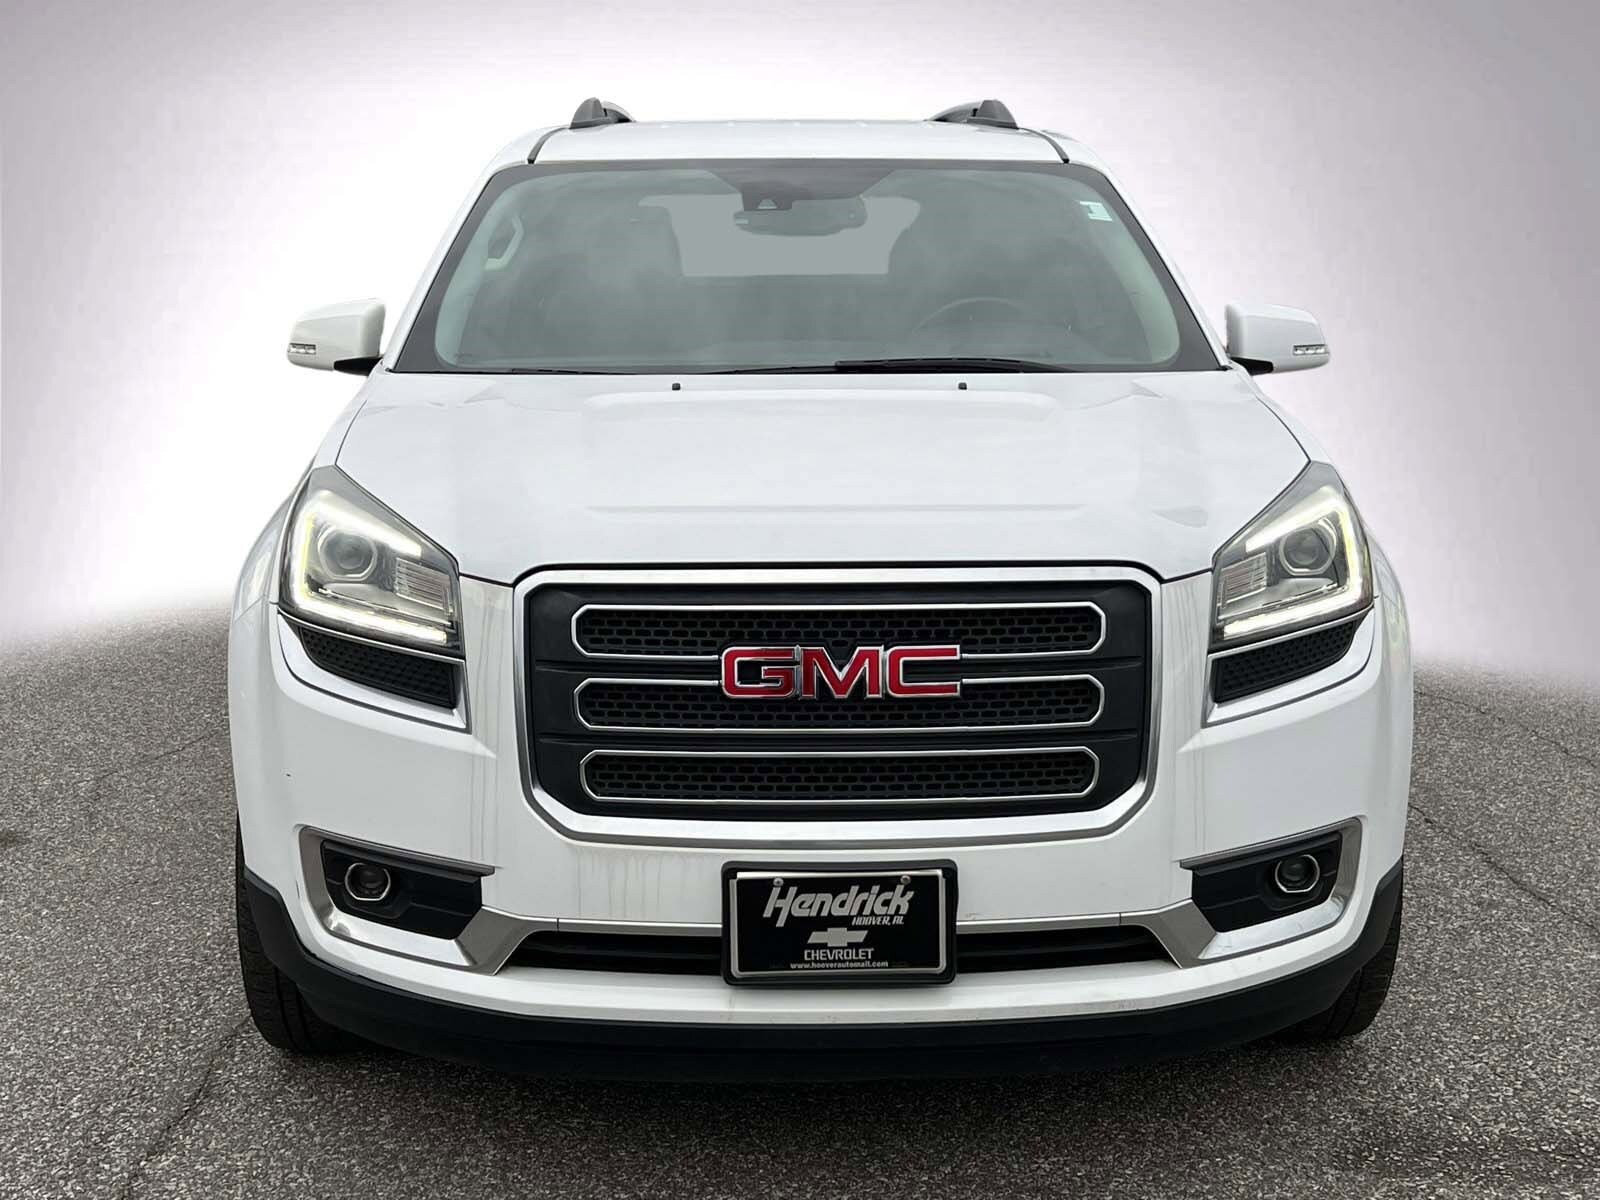 Used 2017 GMC Acadia Limited For Sale Concord NC | 1GKKRSKD0HJ313604